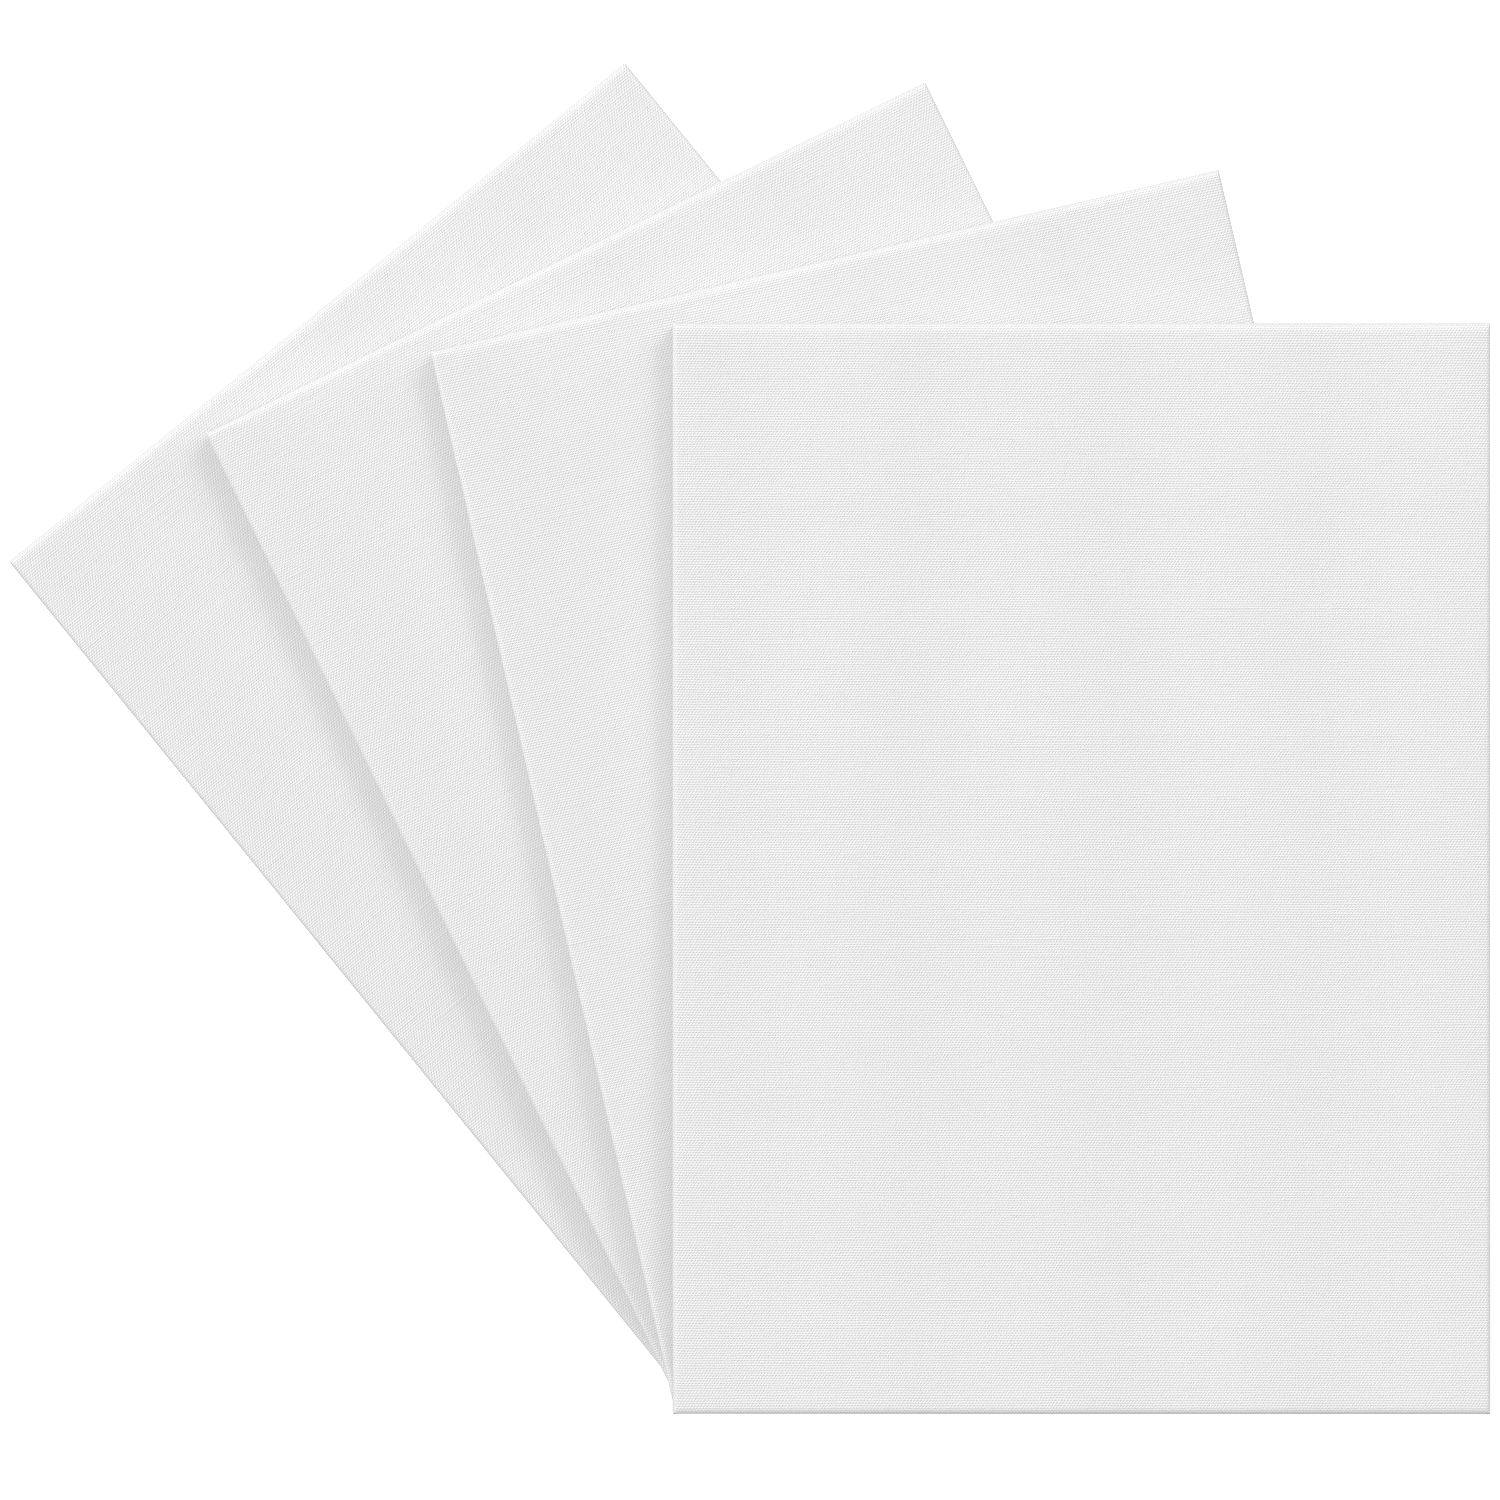 ARTEZA Canvases for Painting, Pack of 4, 18 x 24 Inches, Blank White  Stretched Canvas Bulk, 100% Cotton, 8 oz Gesso-Primed, Art Supplies for  Adults